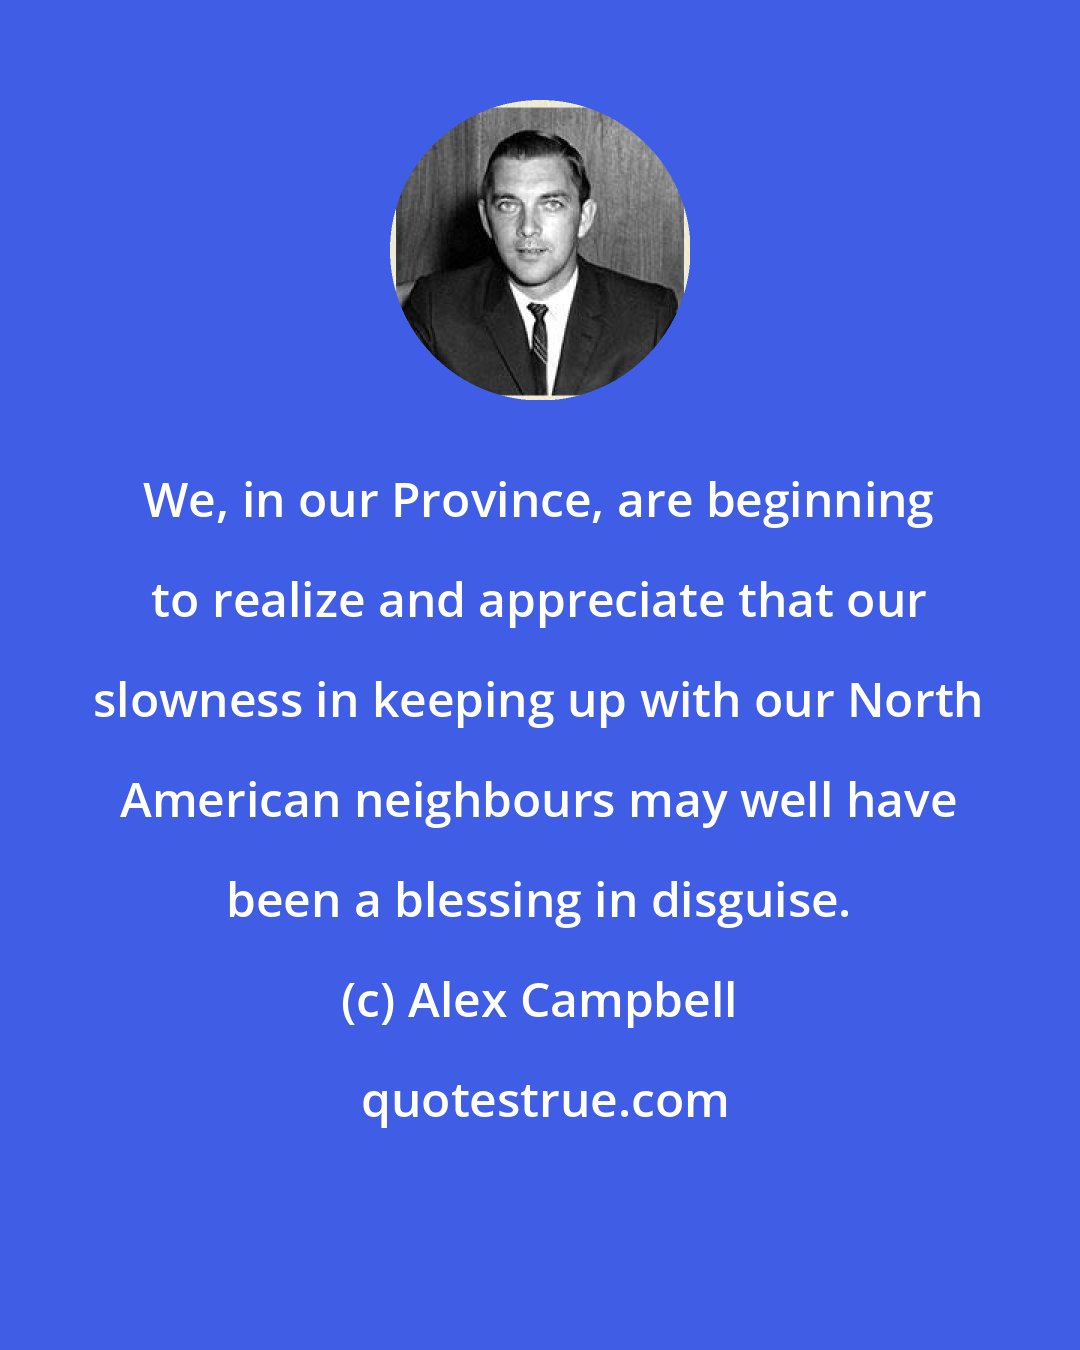 Alex Campbell: We, in our Province, are beginning to realize and appreciate that our slowness in keeping up with our North American neighbours may well have been a blessing in disguise.